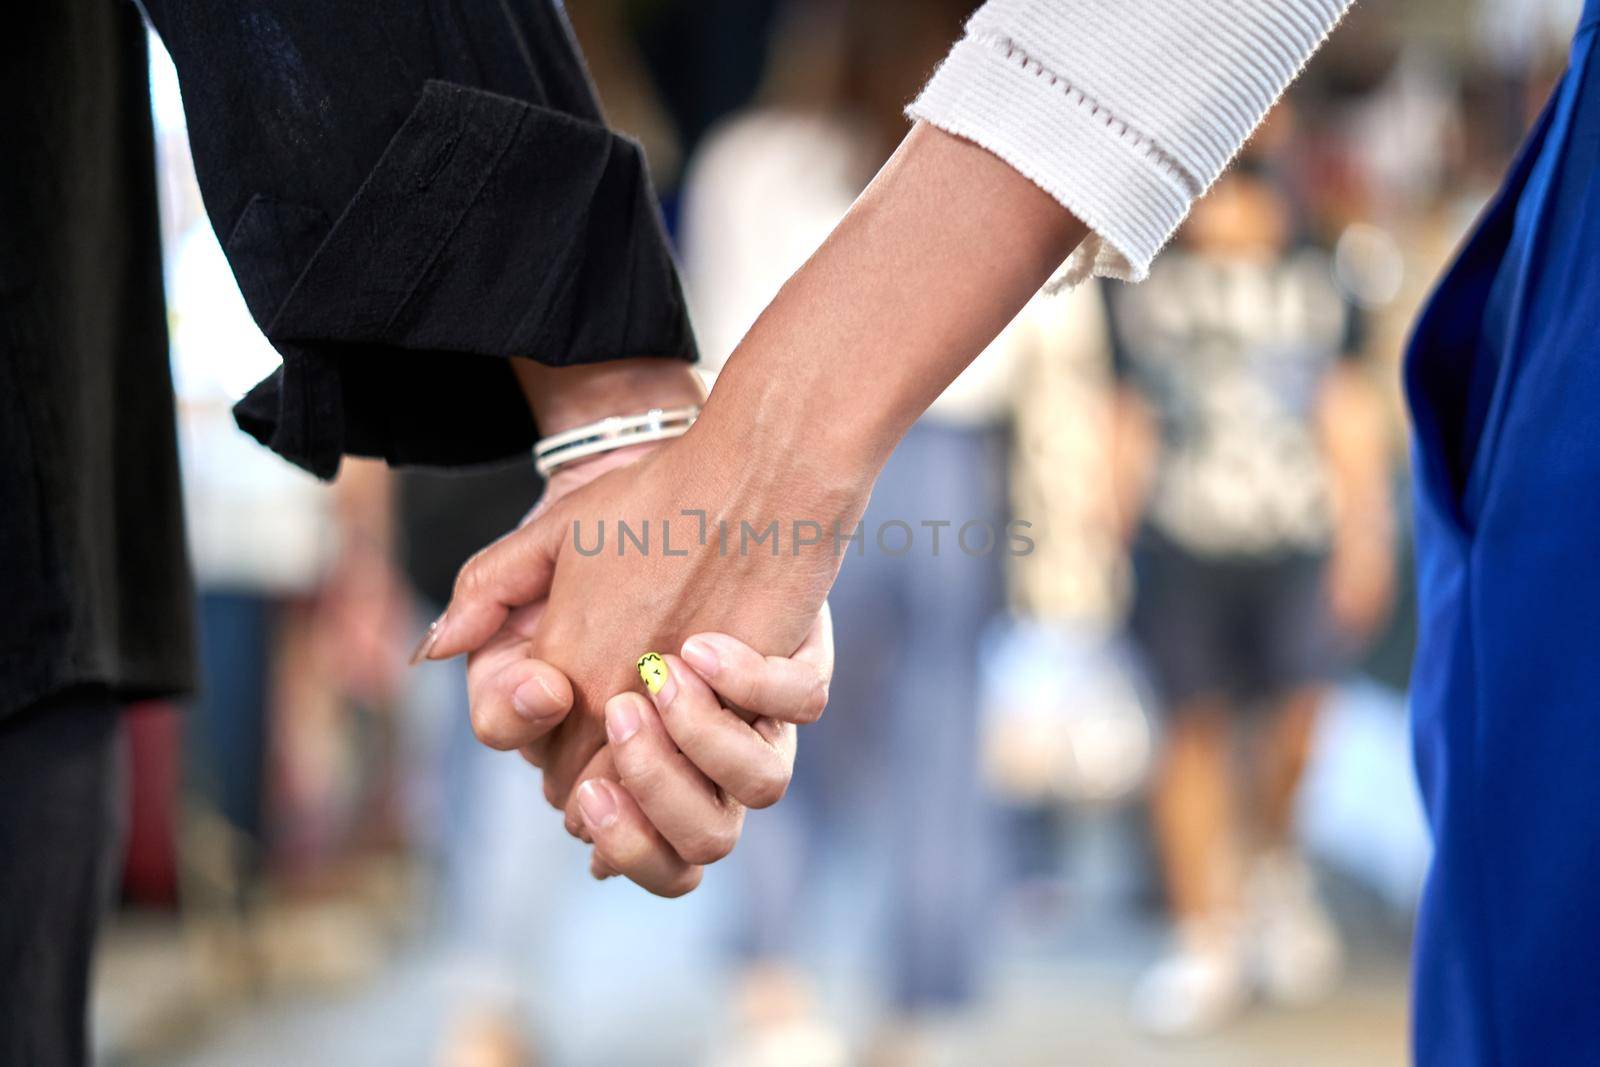 Lesbian couple's hands grabbed in the middle of an urban night market